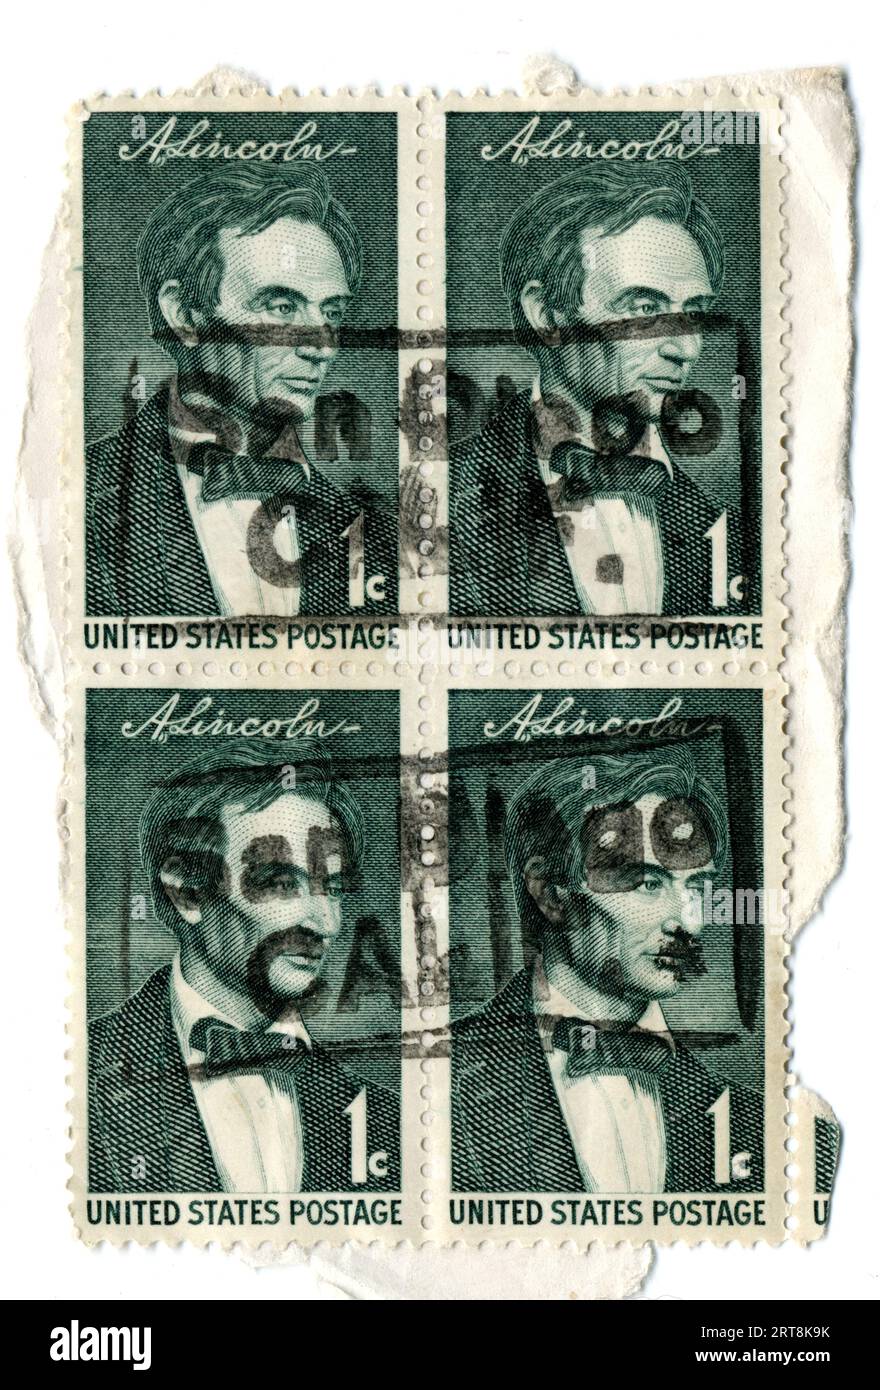 A block of cancelled one-cent U.S. postage stamps honoring former U.S. President Abe Lincoln issued in 1959. Stock Photo